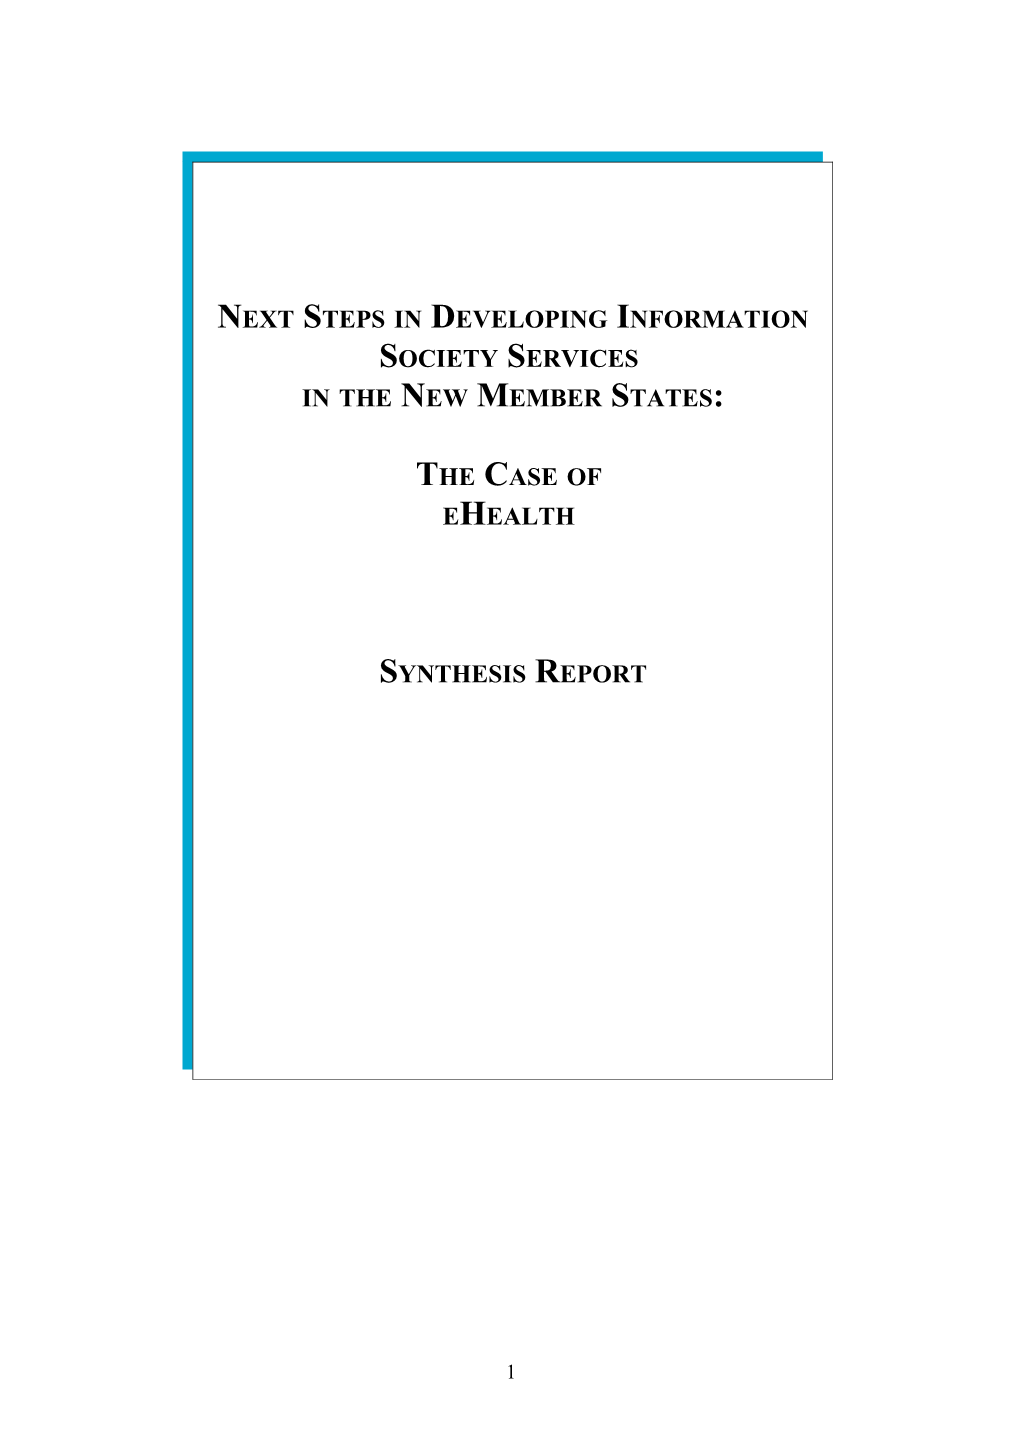 Next Steps in Developing Information Society Services in the New Member States: the Case